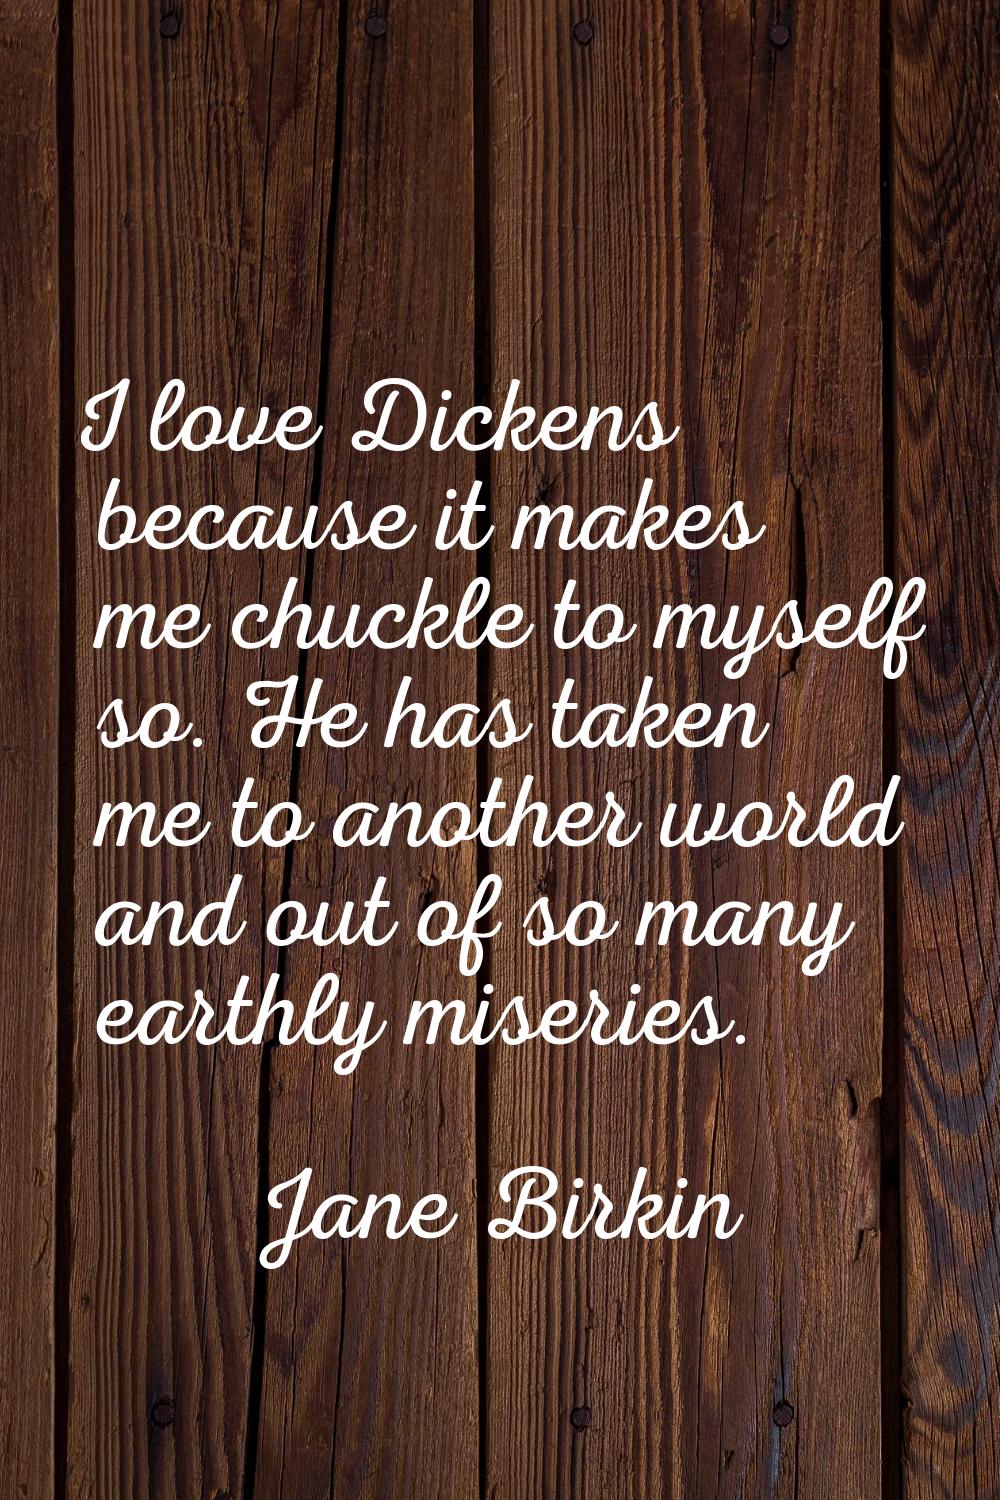 I love Dickens because it makes me chuckle to myself so. He has taken me to another world and out o